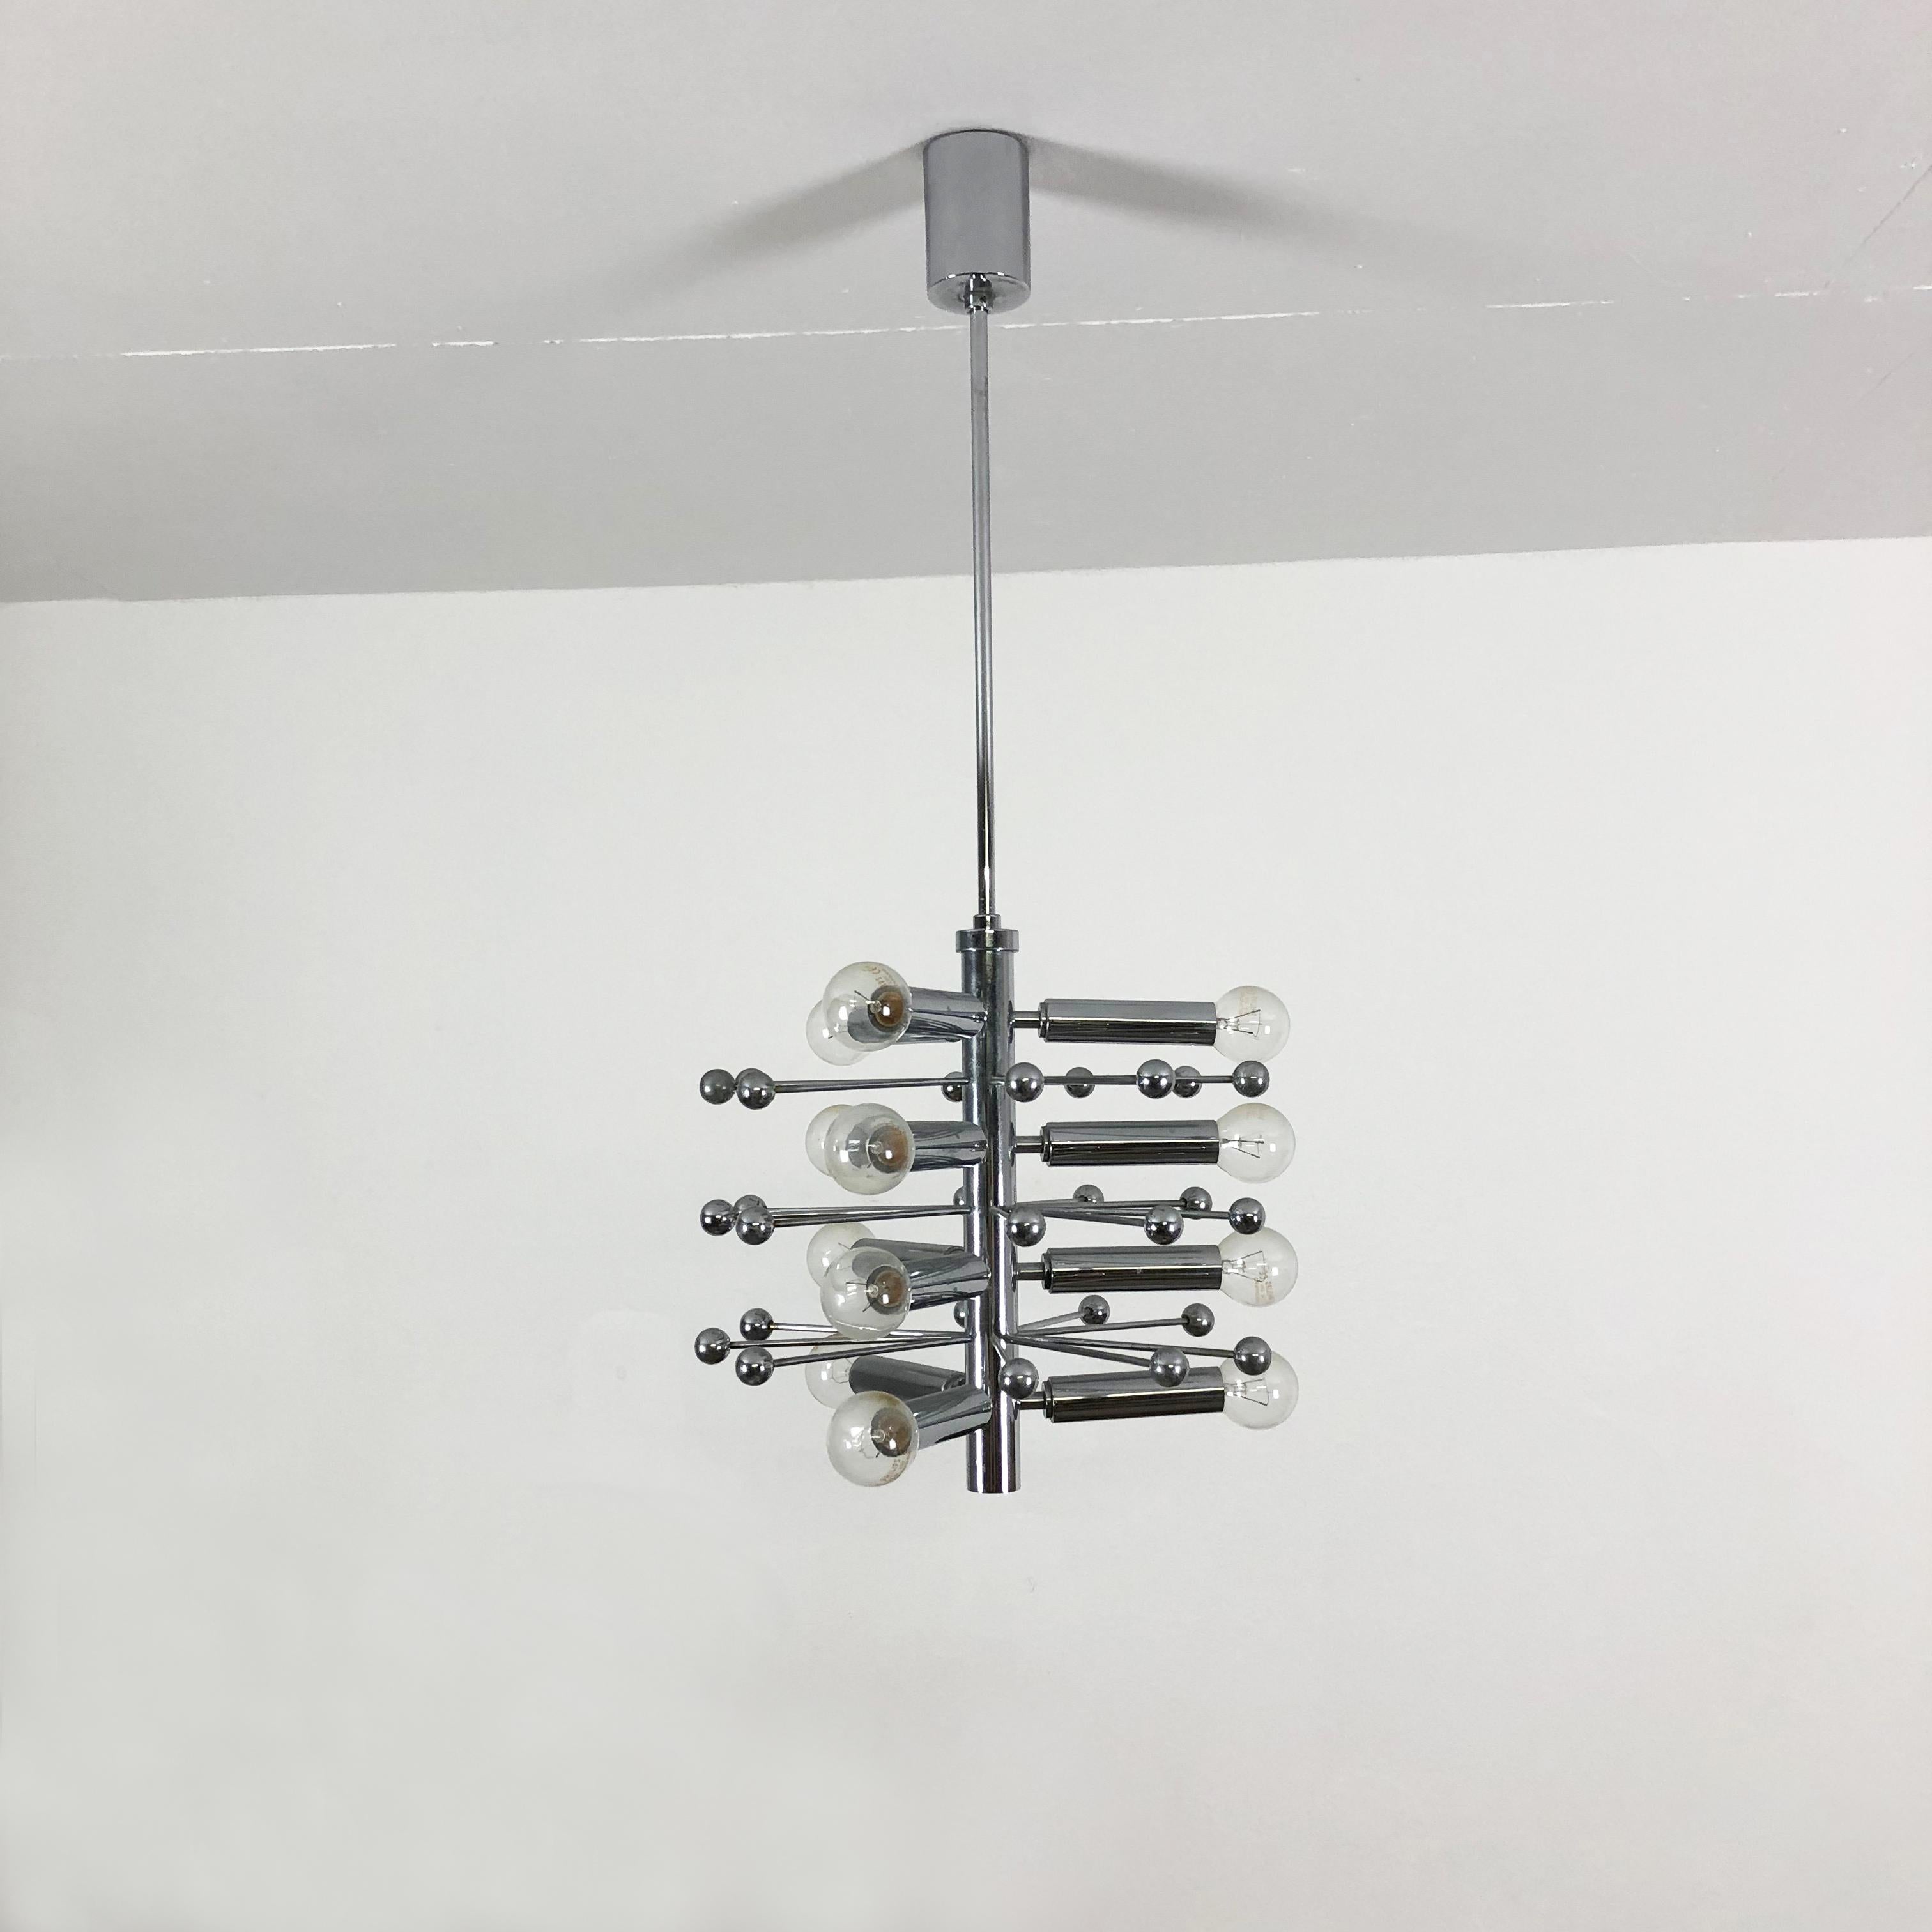 Article:

Sputnik hanging light


Producer:

Cosack Lights, Germany


Origin:

Germany



Age:

1970s



This 1970s hanging light was designed and made in Germany. due to the quality and characteristically design of this